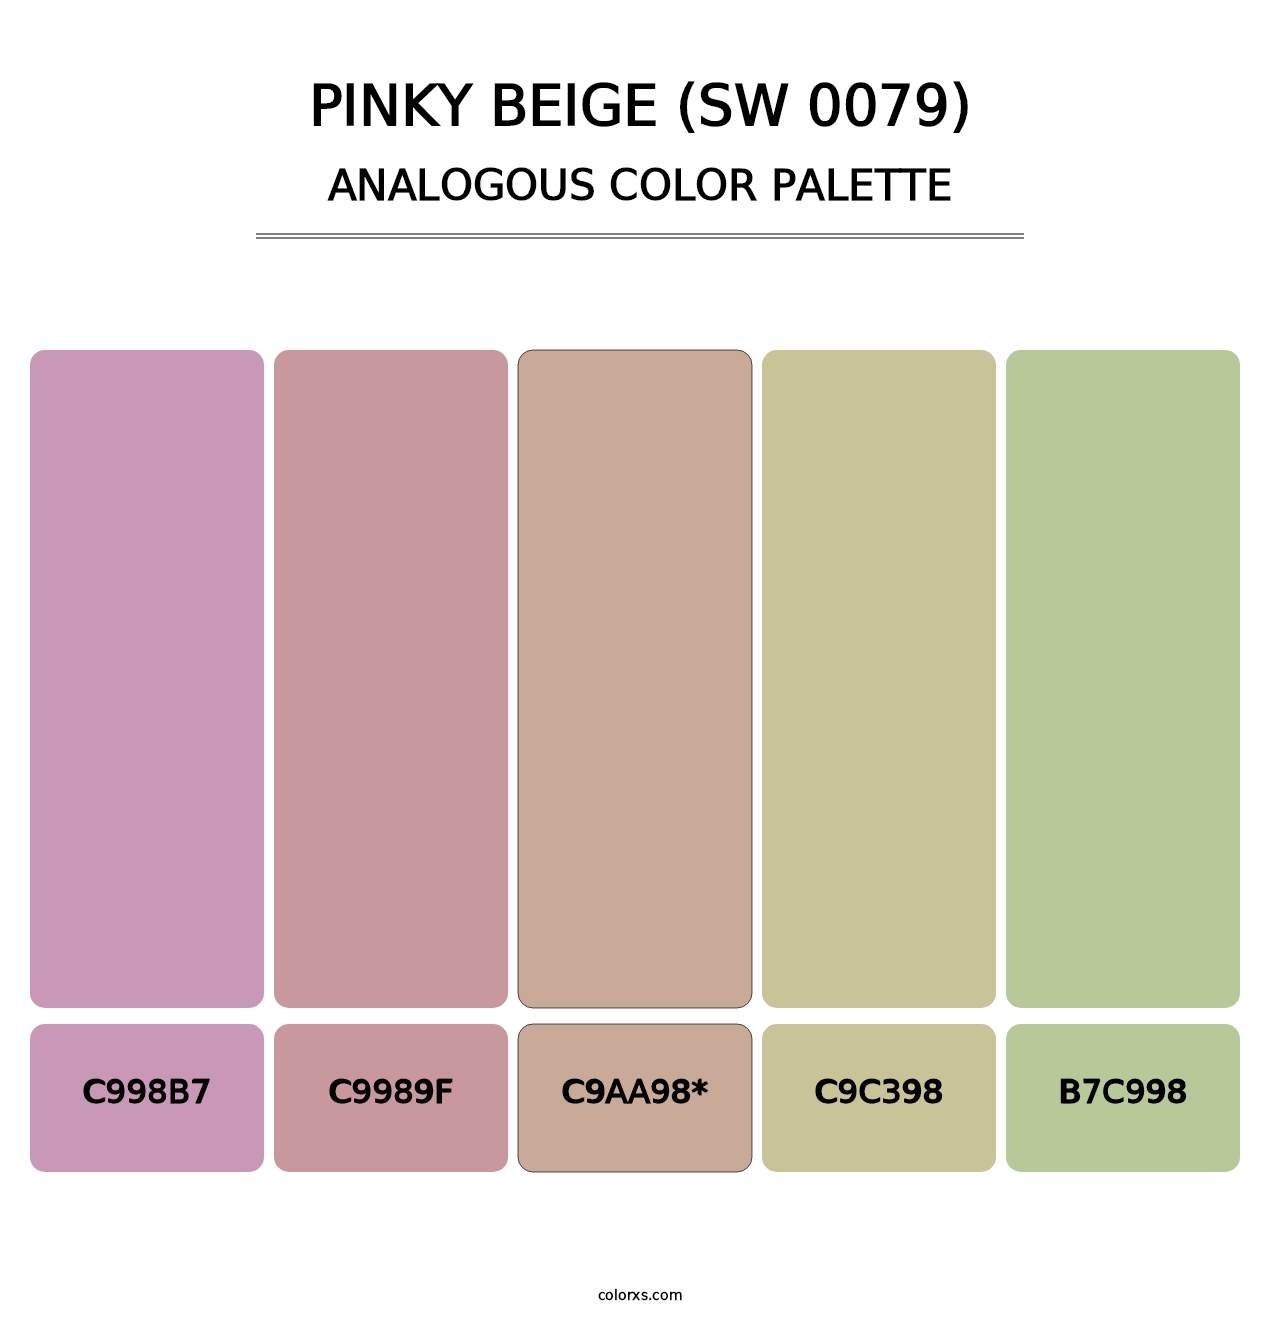 Pinky Beige (SW 0079) - Analogous Color Palette